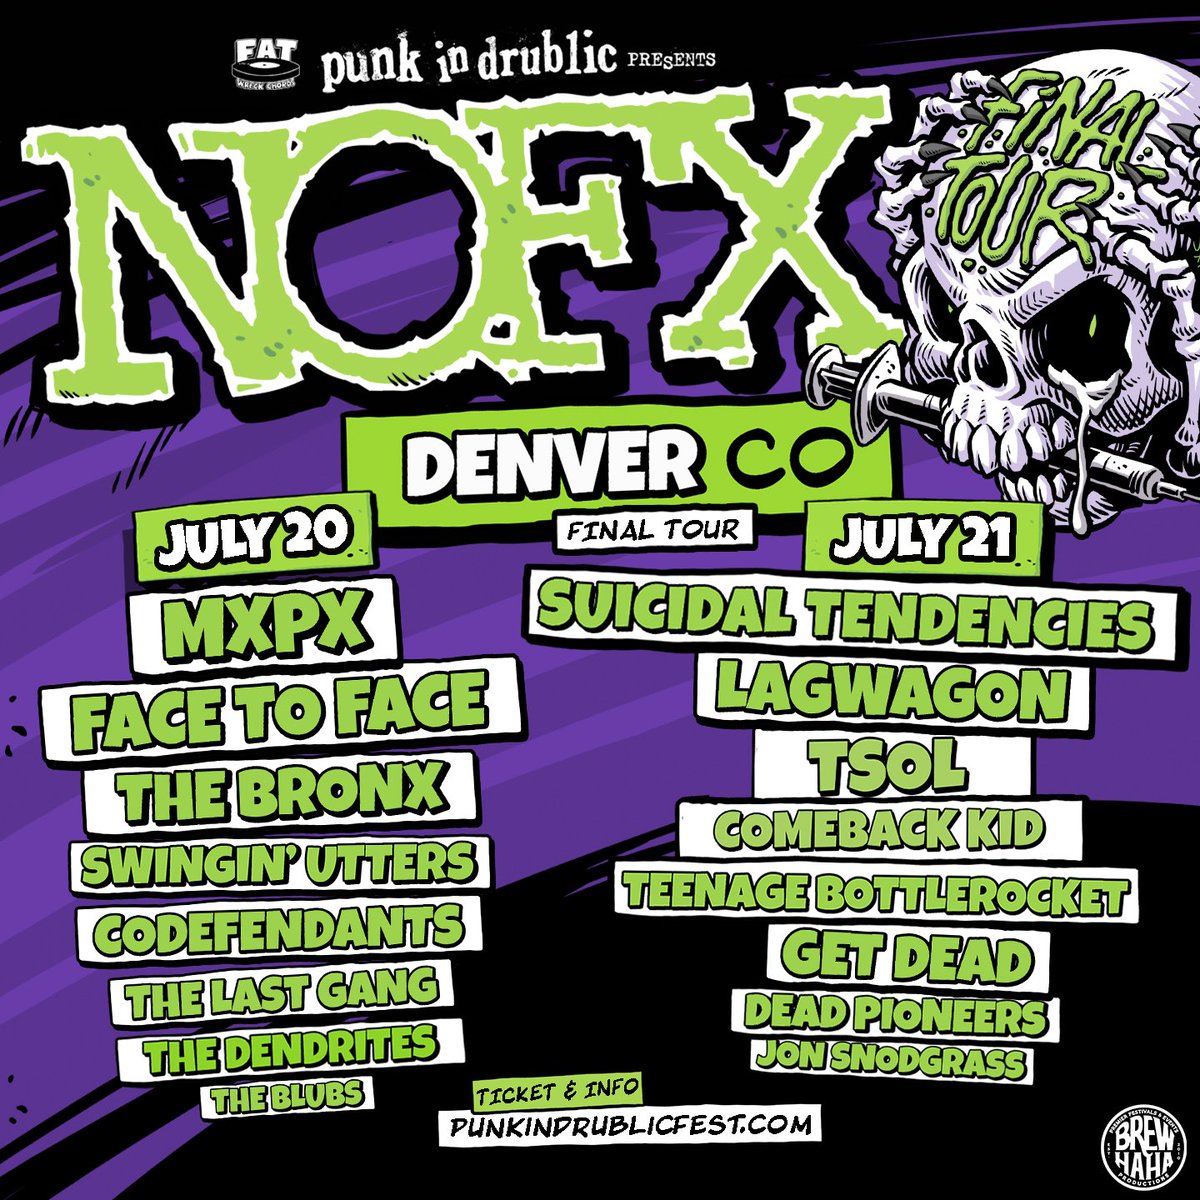 🚨DENVER🚨 See ya July 20th for the LAST EVER @nofx shows in Denver! Can't wait to be back in the Mile High City! Tickets are on sale now! punkindrublicfest.com/denver #TheLastGang #nofxfinaltour